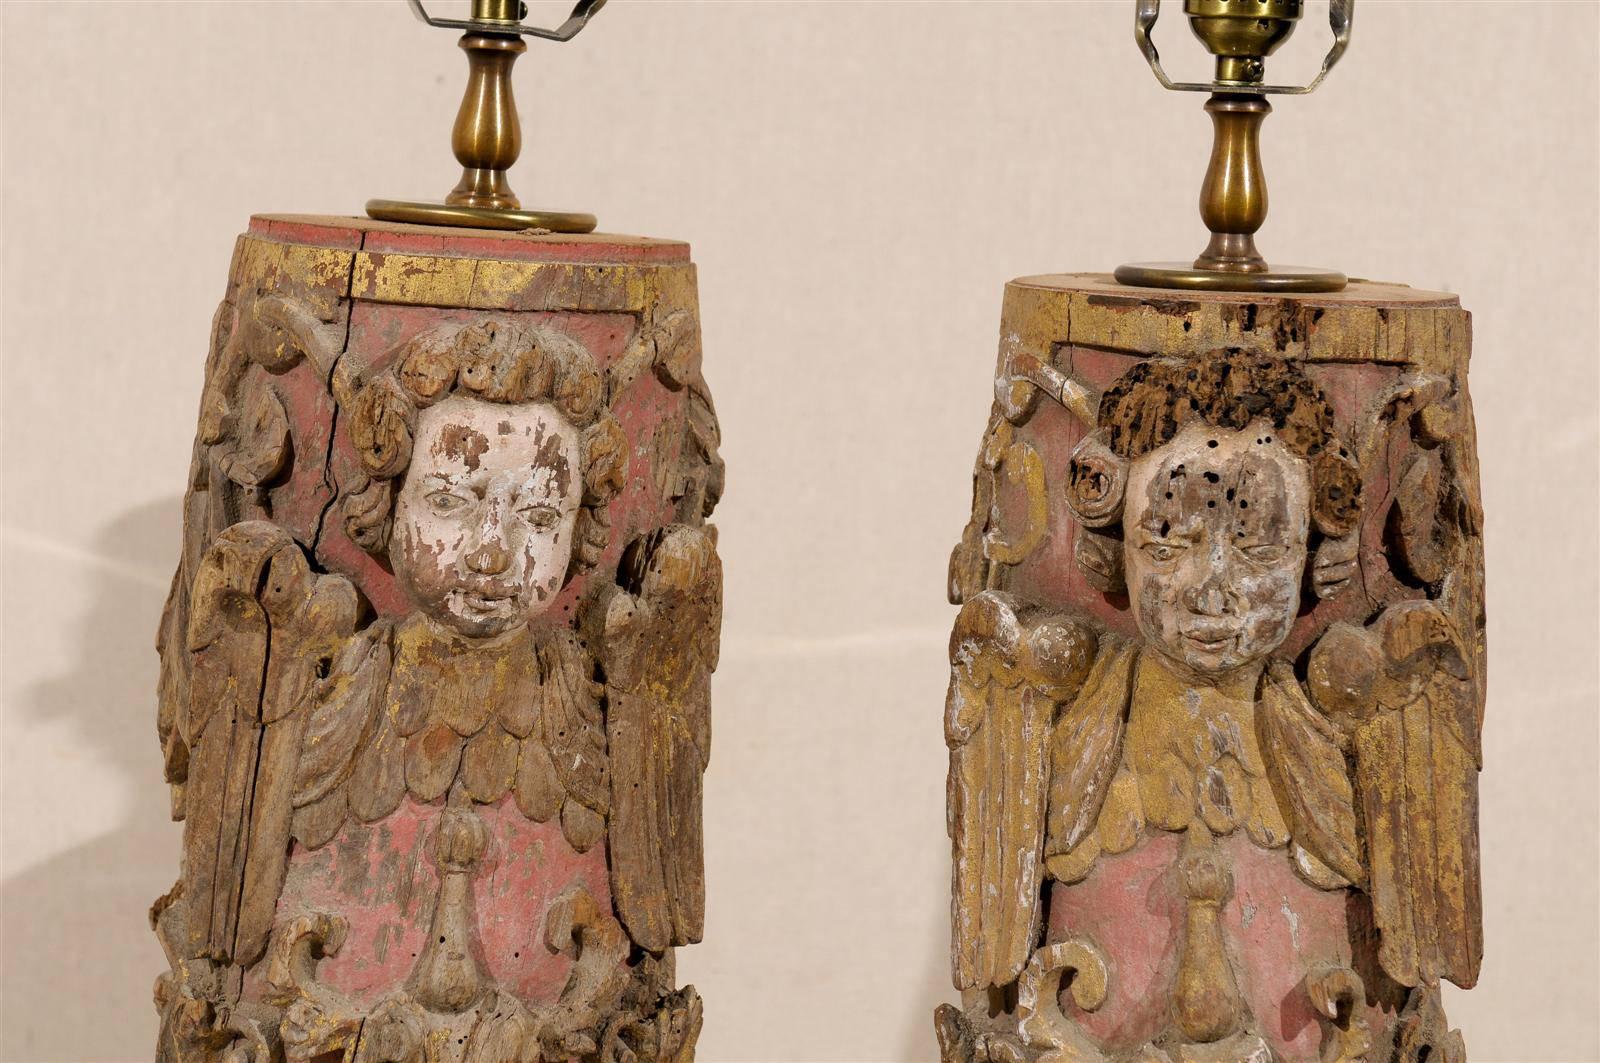 Pair of Portuguese 18th Century Painted Wood Table Lamps with Angel Depiction For Sale 1